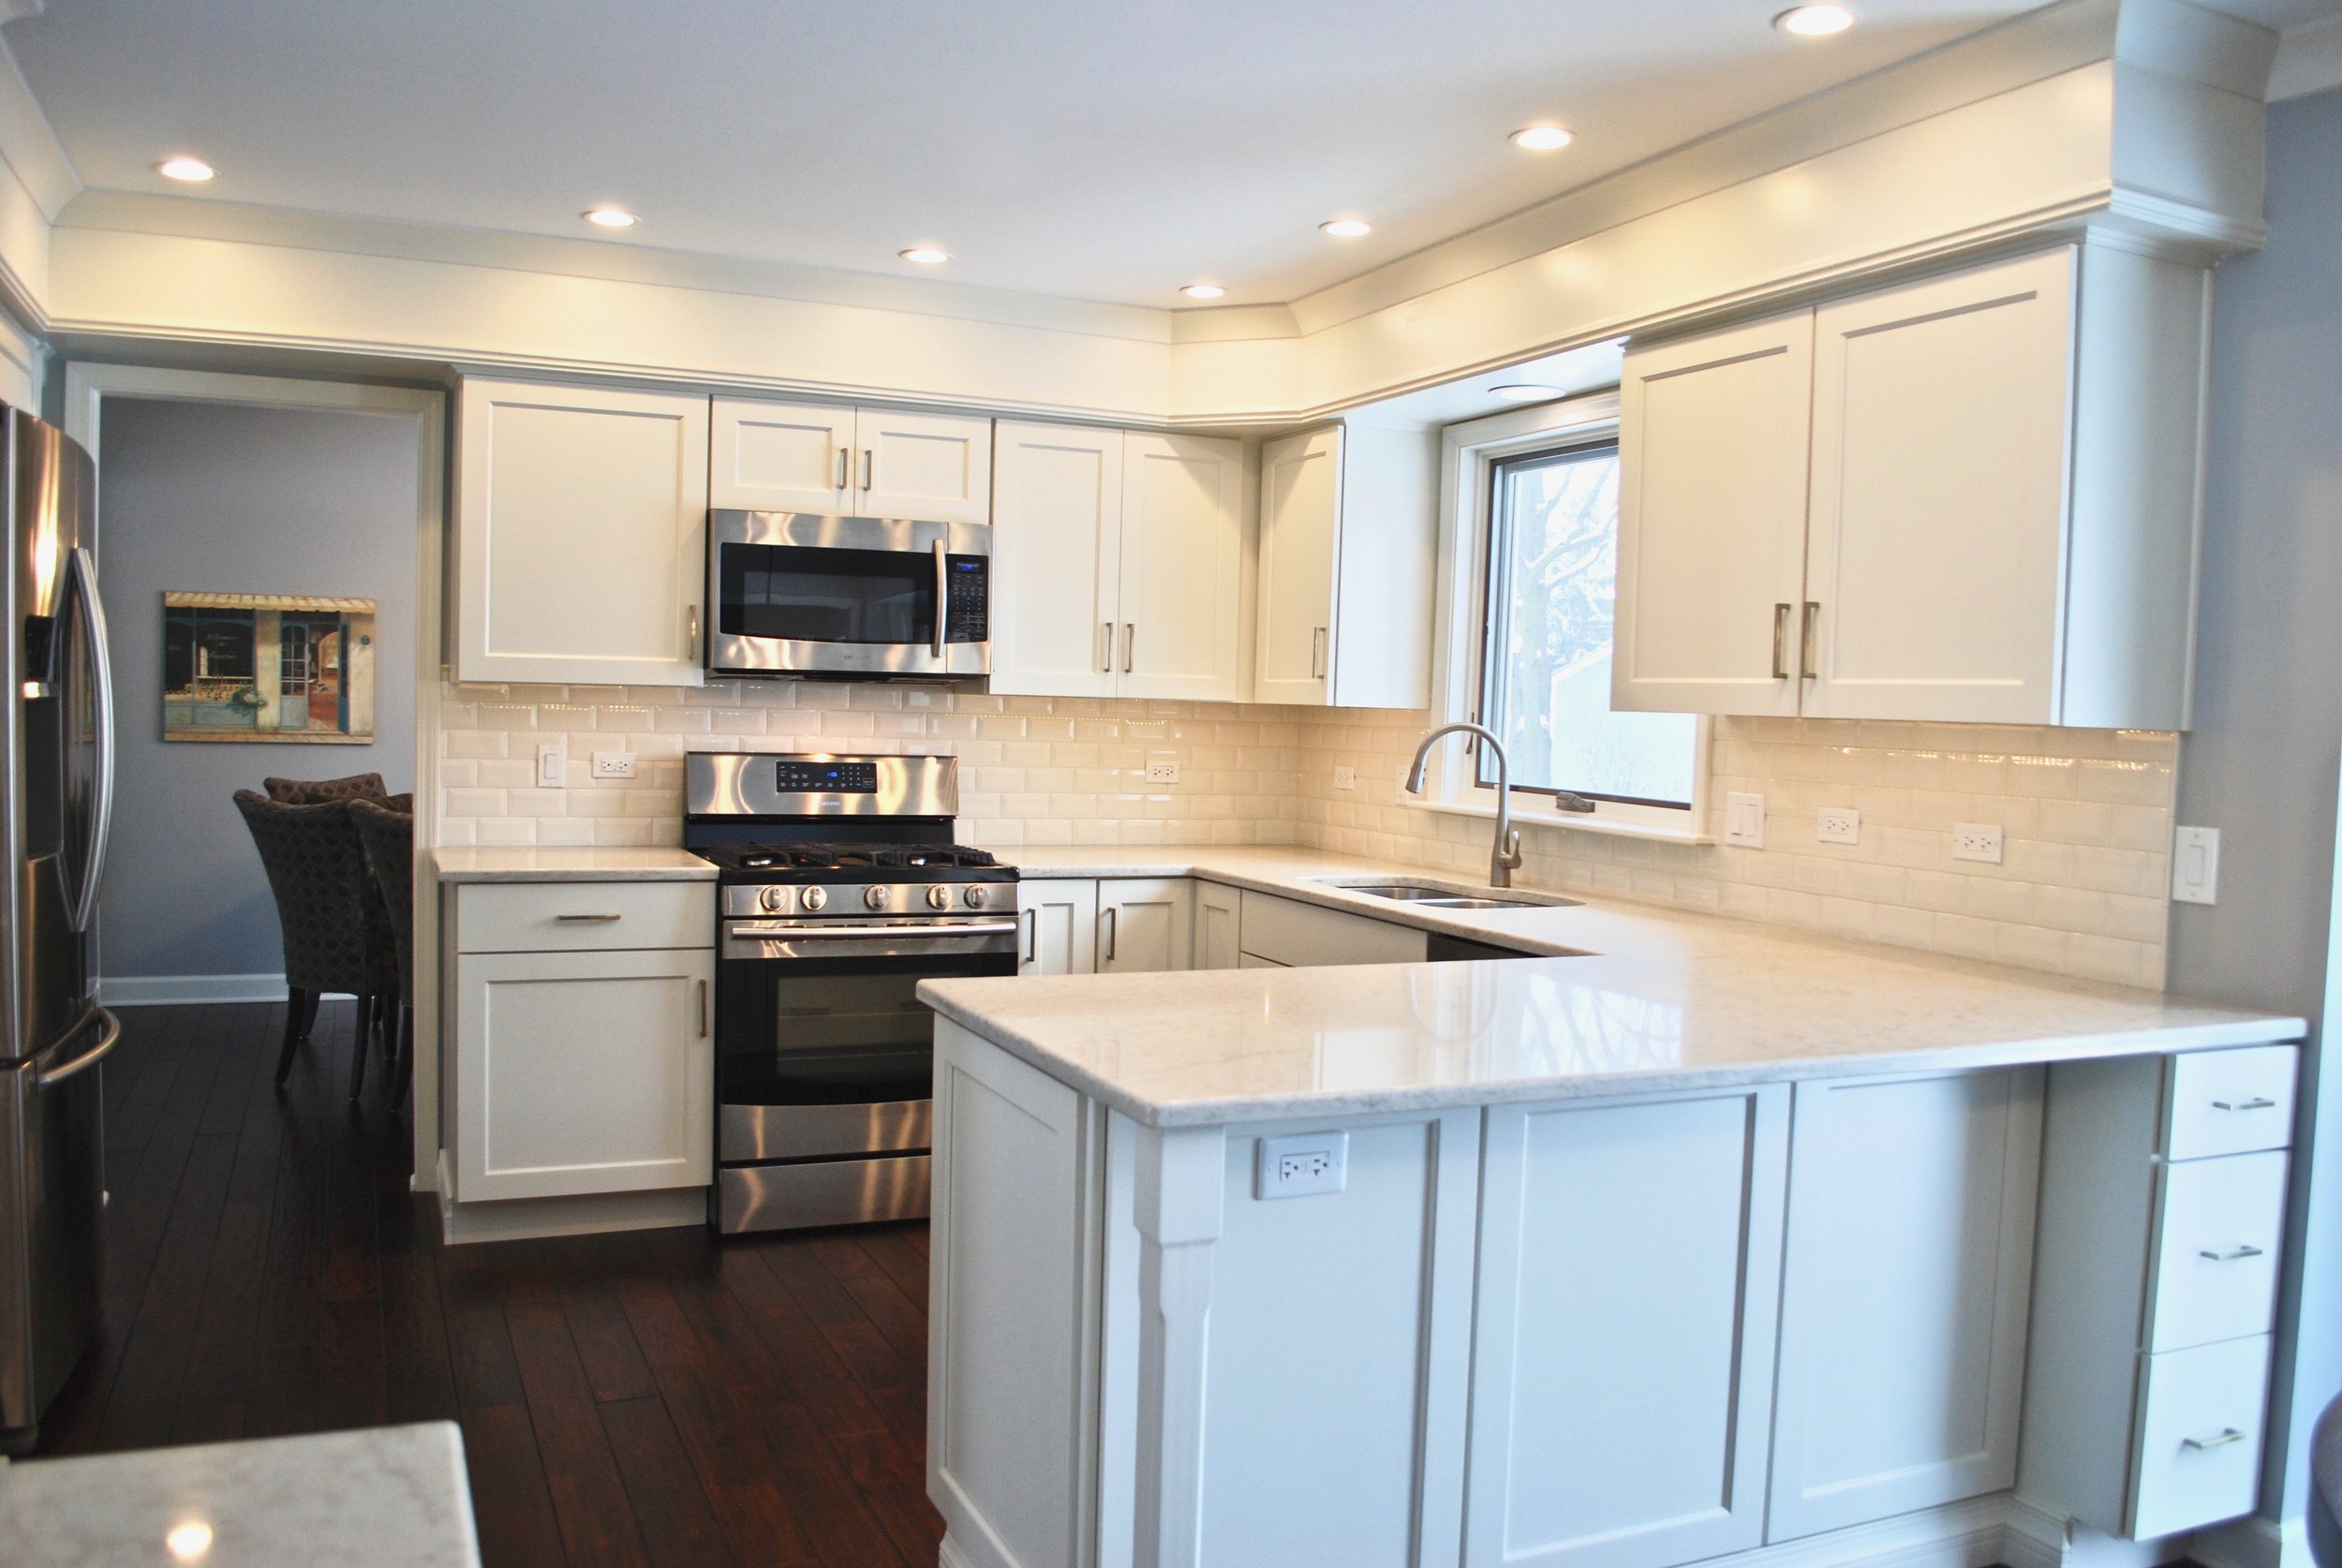 NAPERVILLE KITCHEN REMODELING OF SMALLER TO MEDIUM KITCHENS 